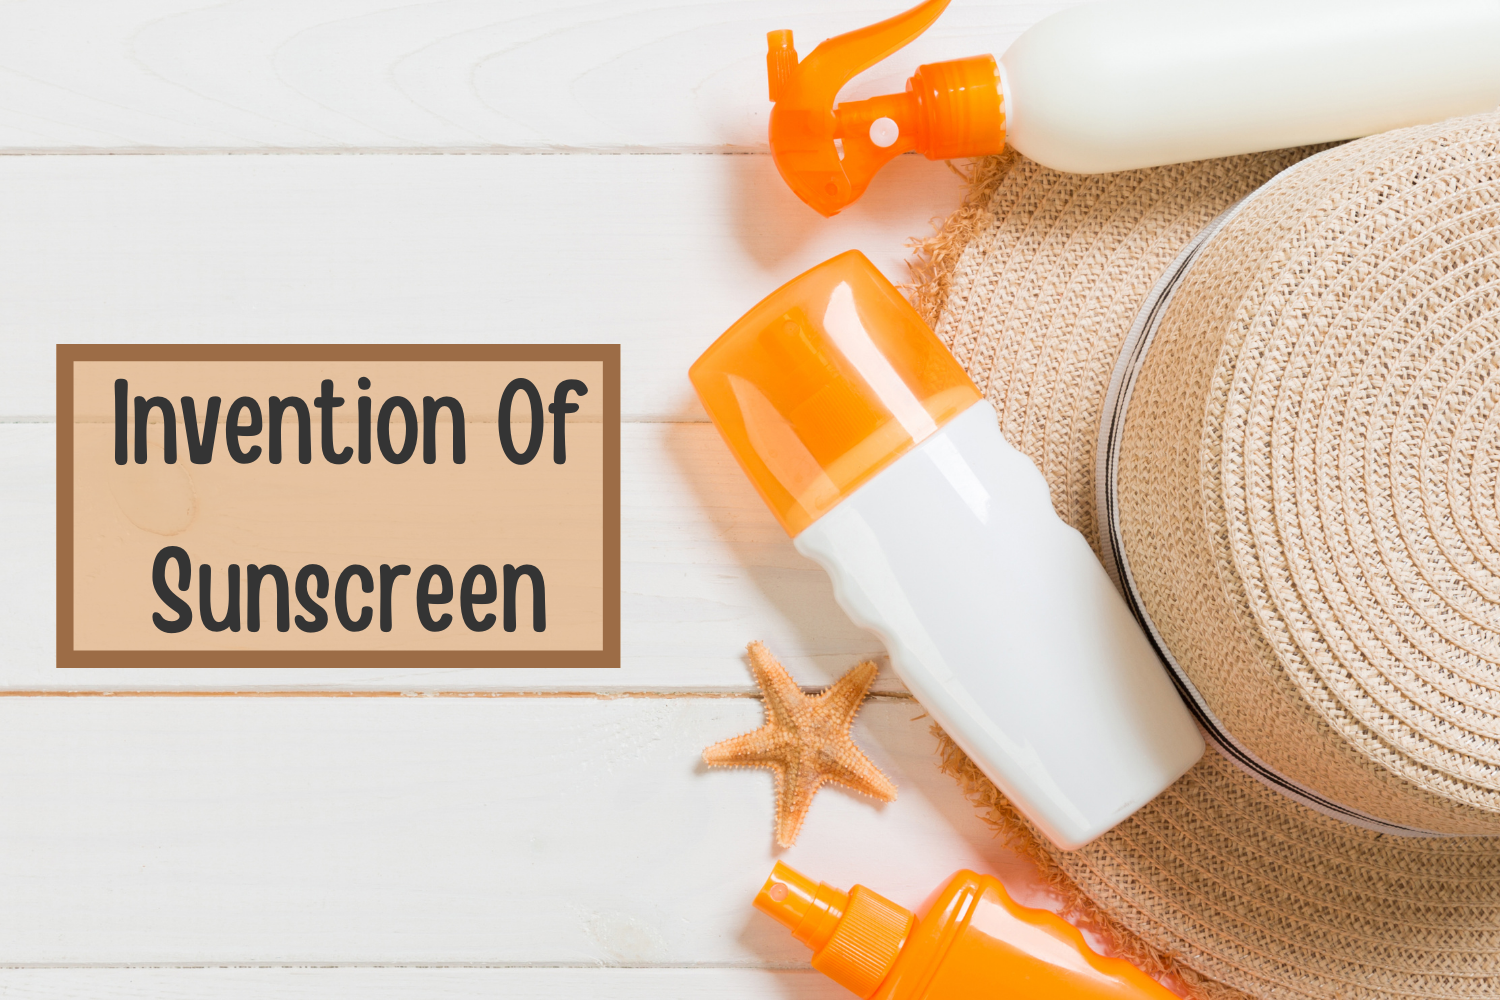 When was Sunscreen Invented – The History of Sunscreen